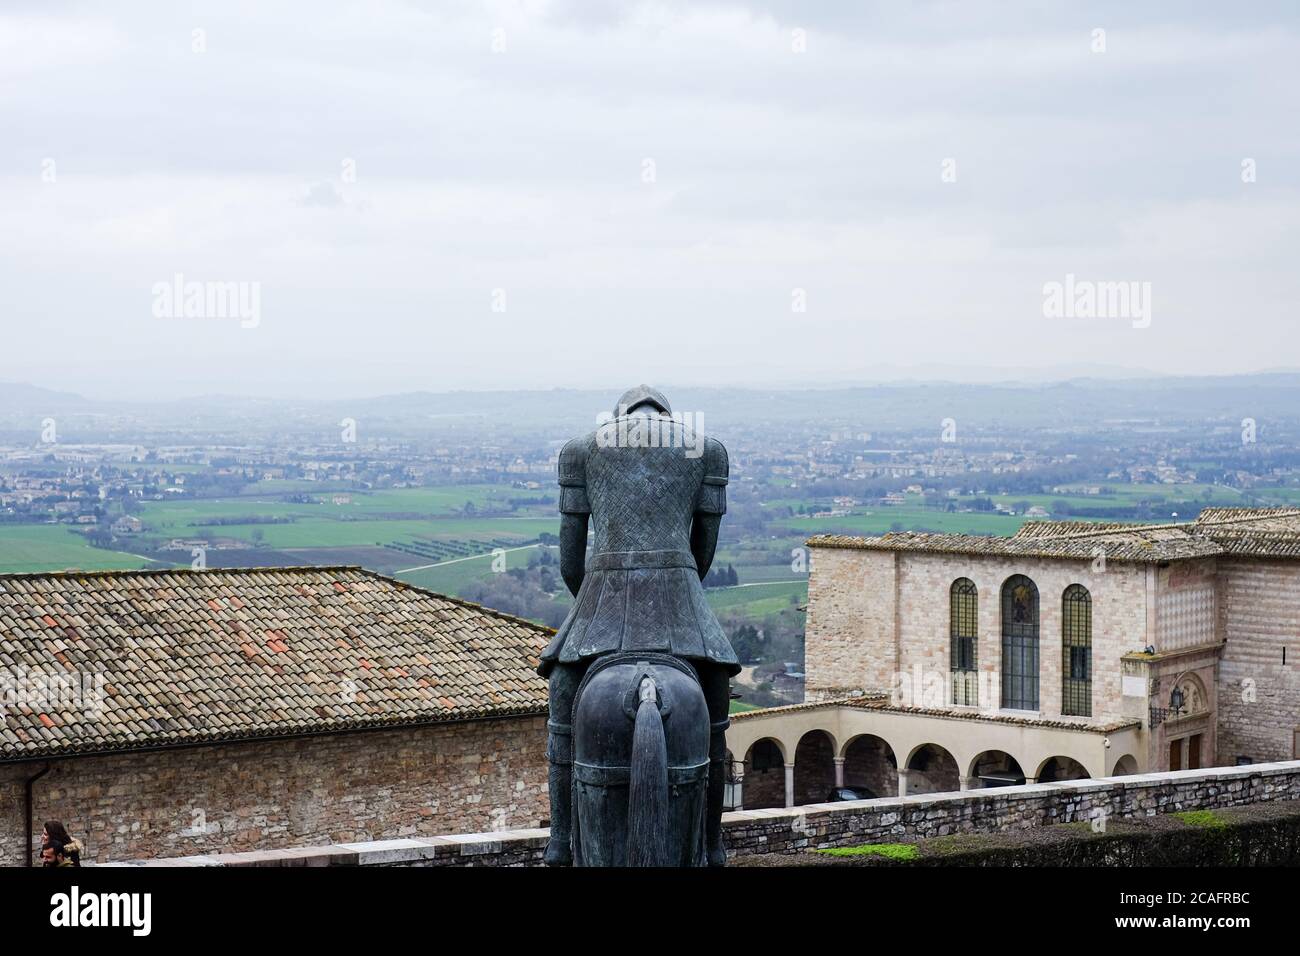 Assisi,italy- june 30 2020: Famous bronze sculpture in front of saint francis of Assisi church over old city landscape,italy Stock Photo